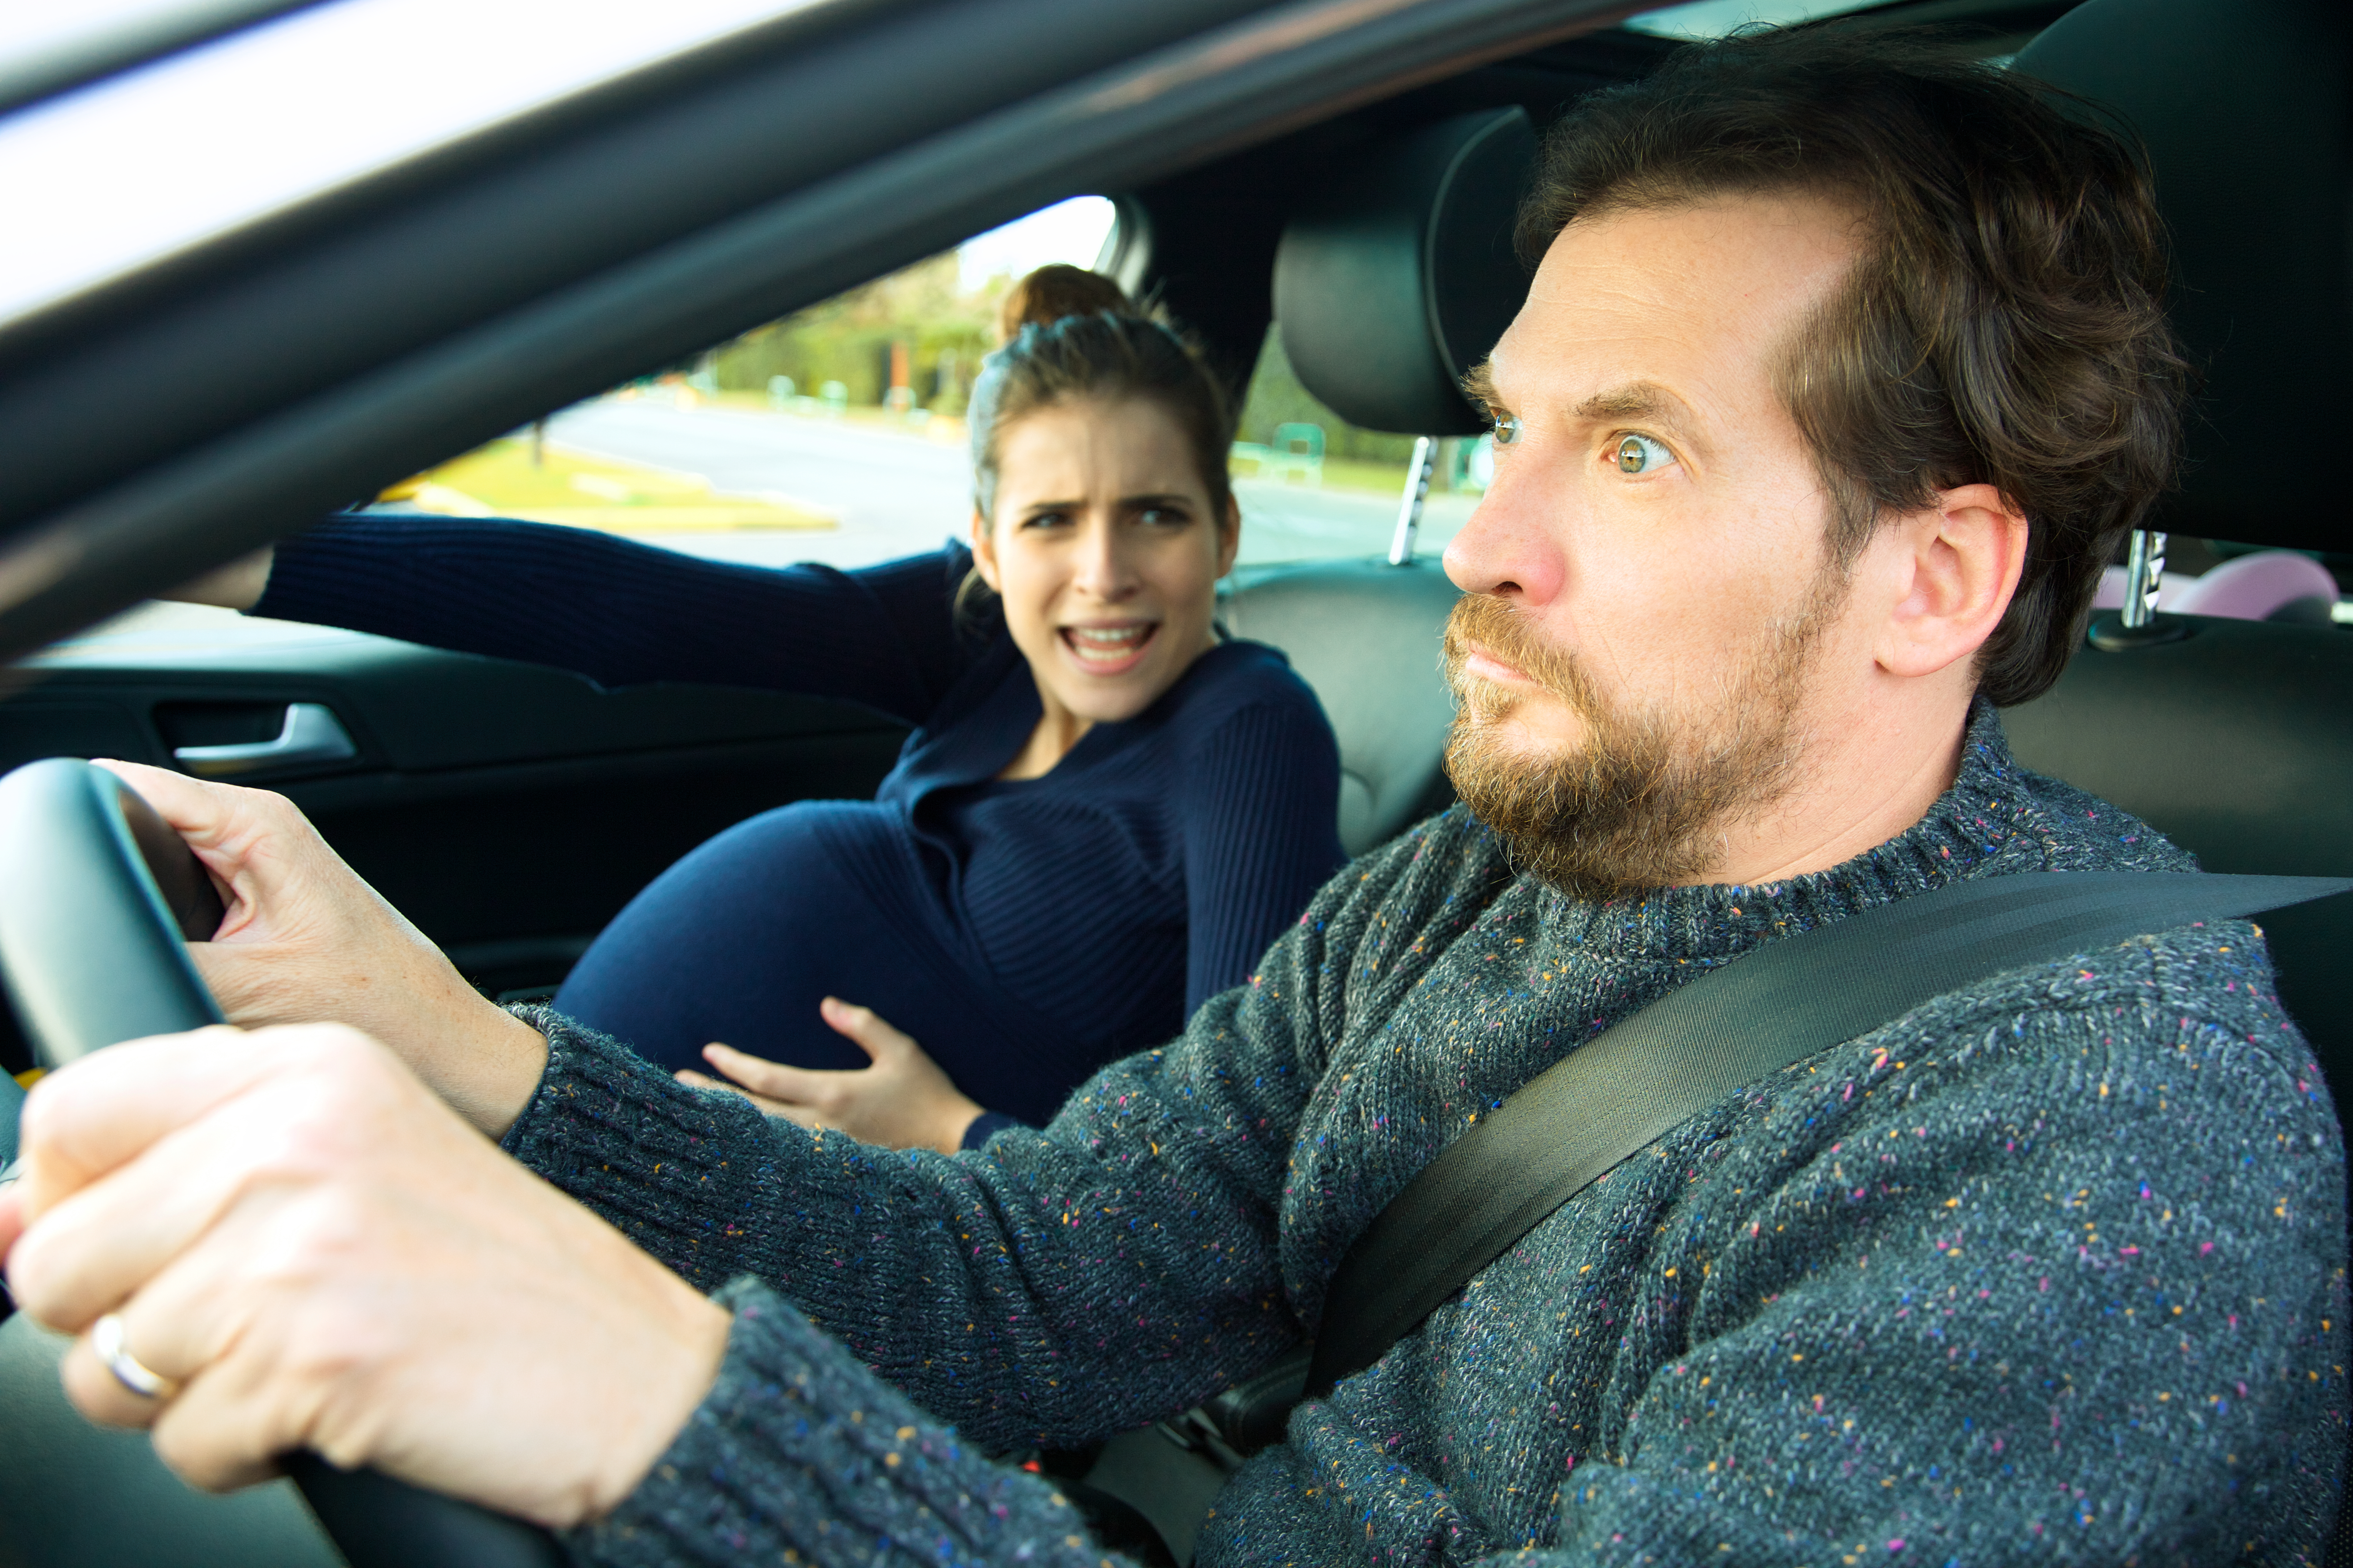 A man looking terrified while driving with a pregnant woman in labor | Source: Shutterstock